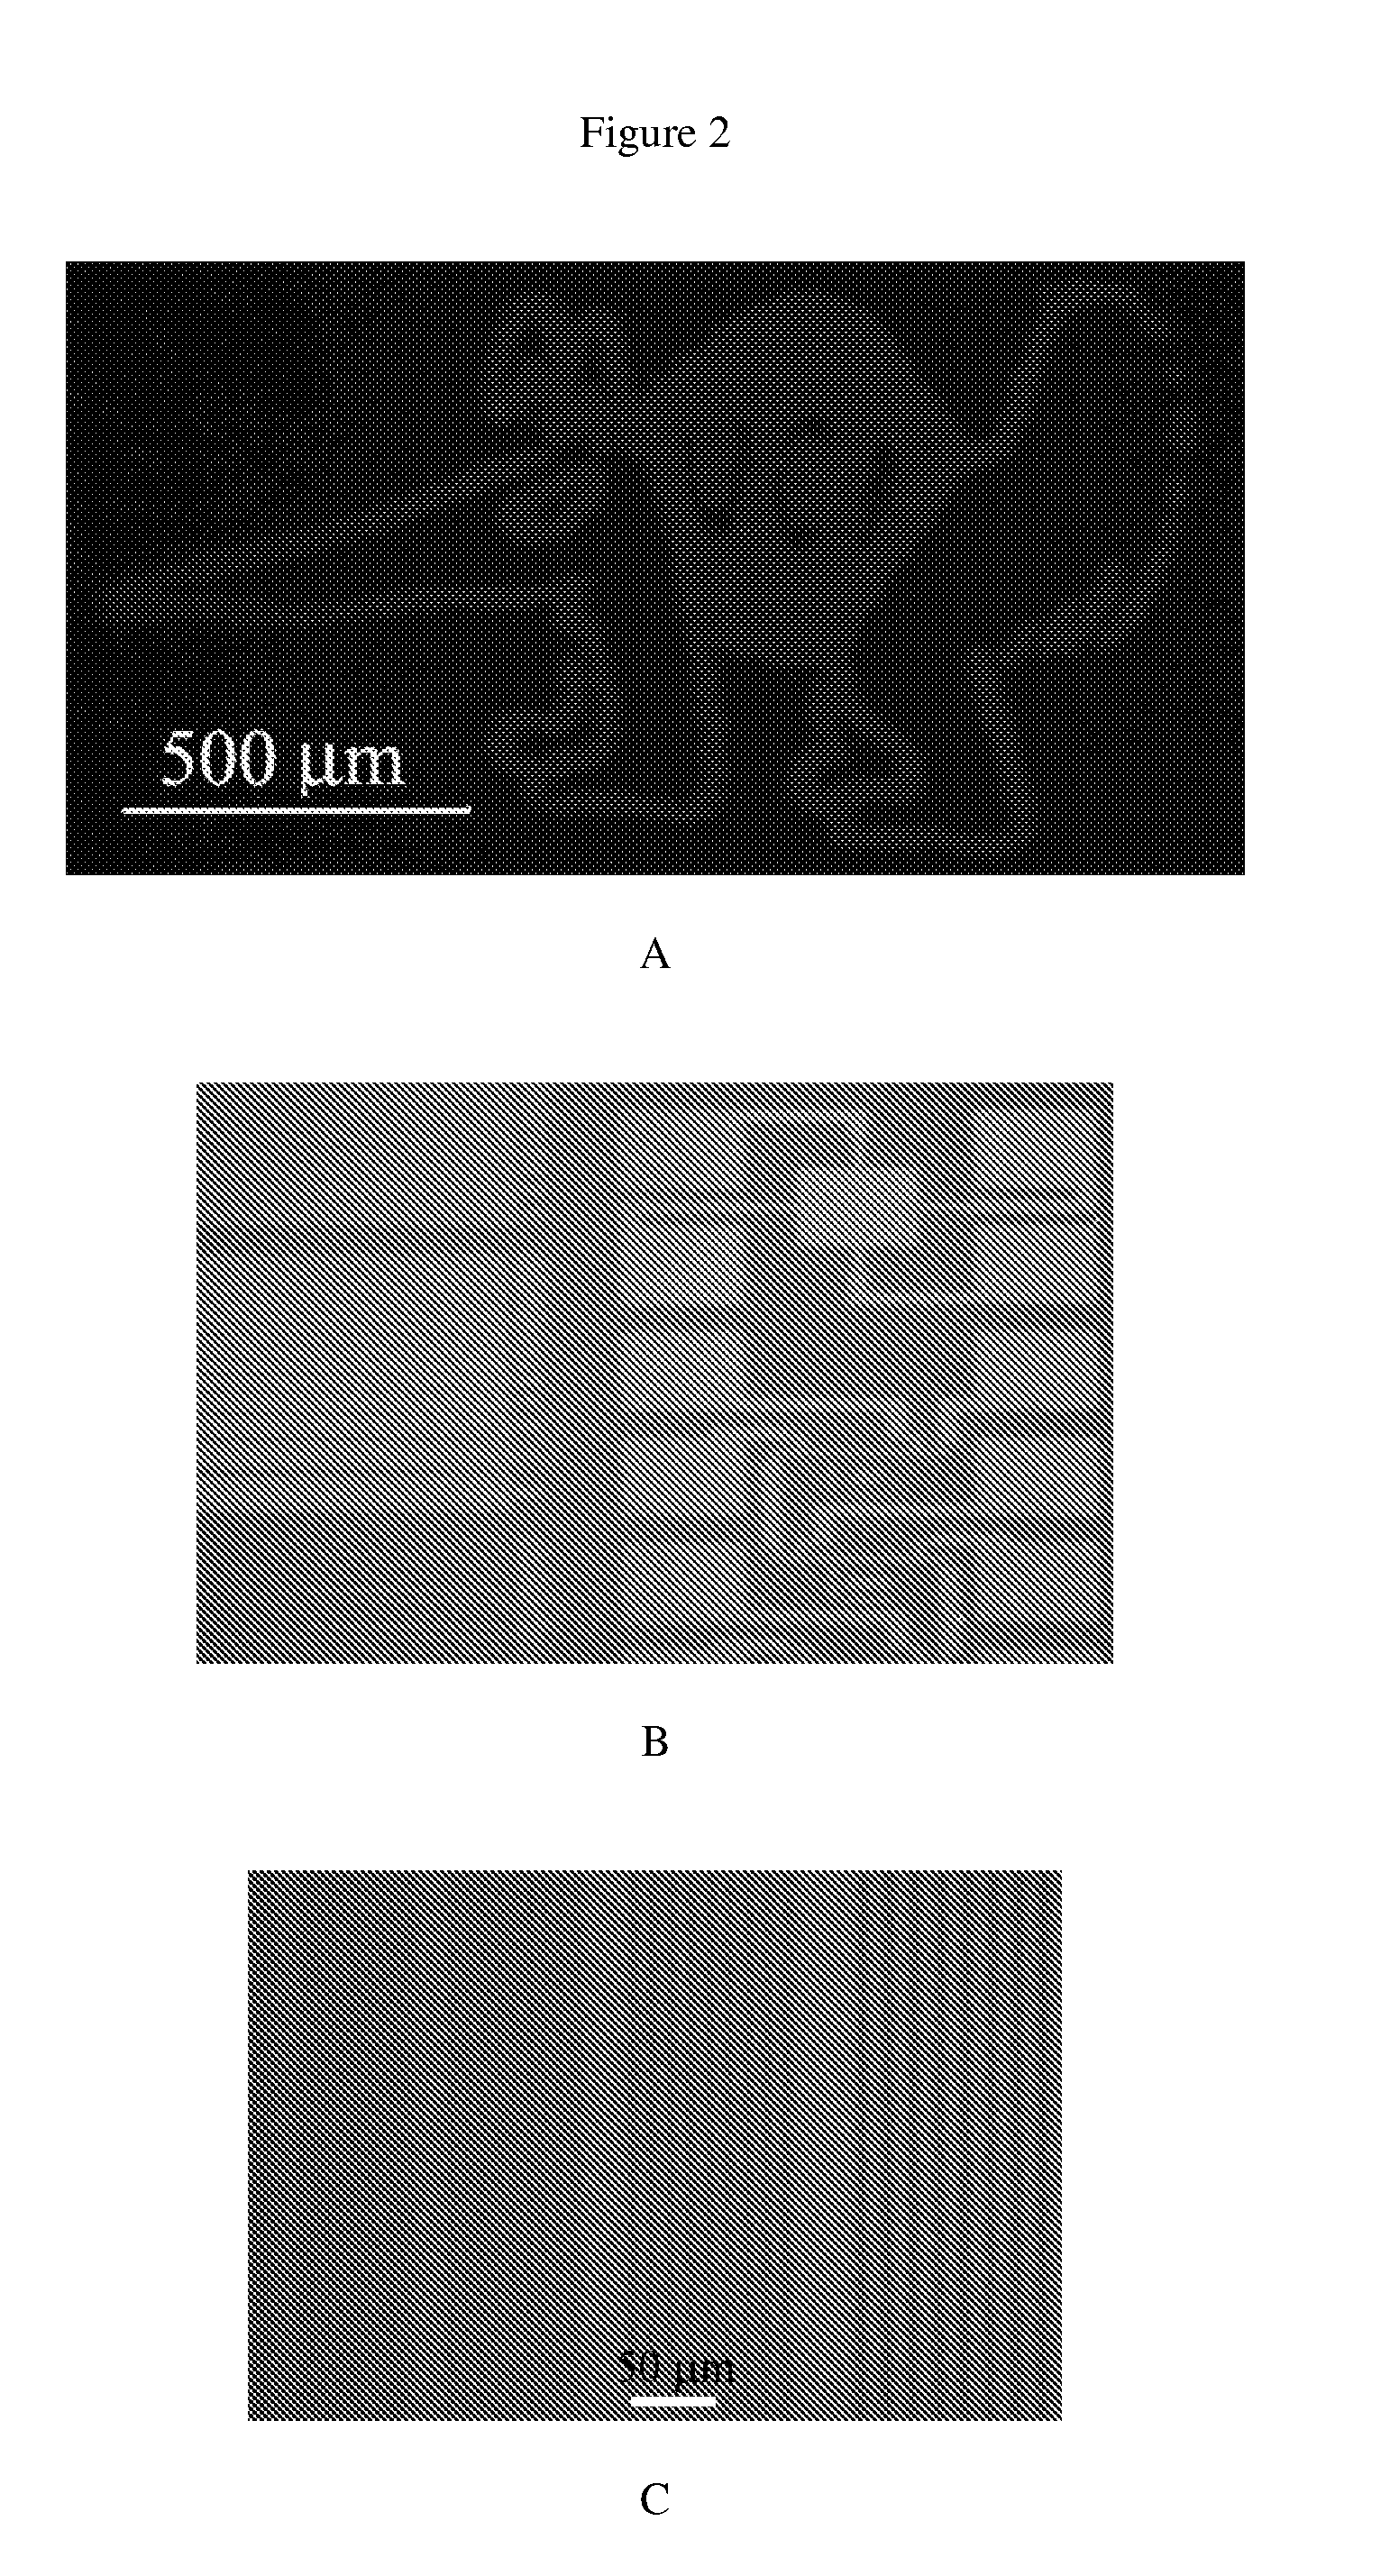 Self-indicating photo-repatternable hybrid materials and polymers